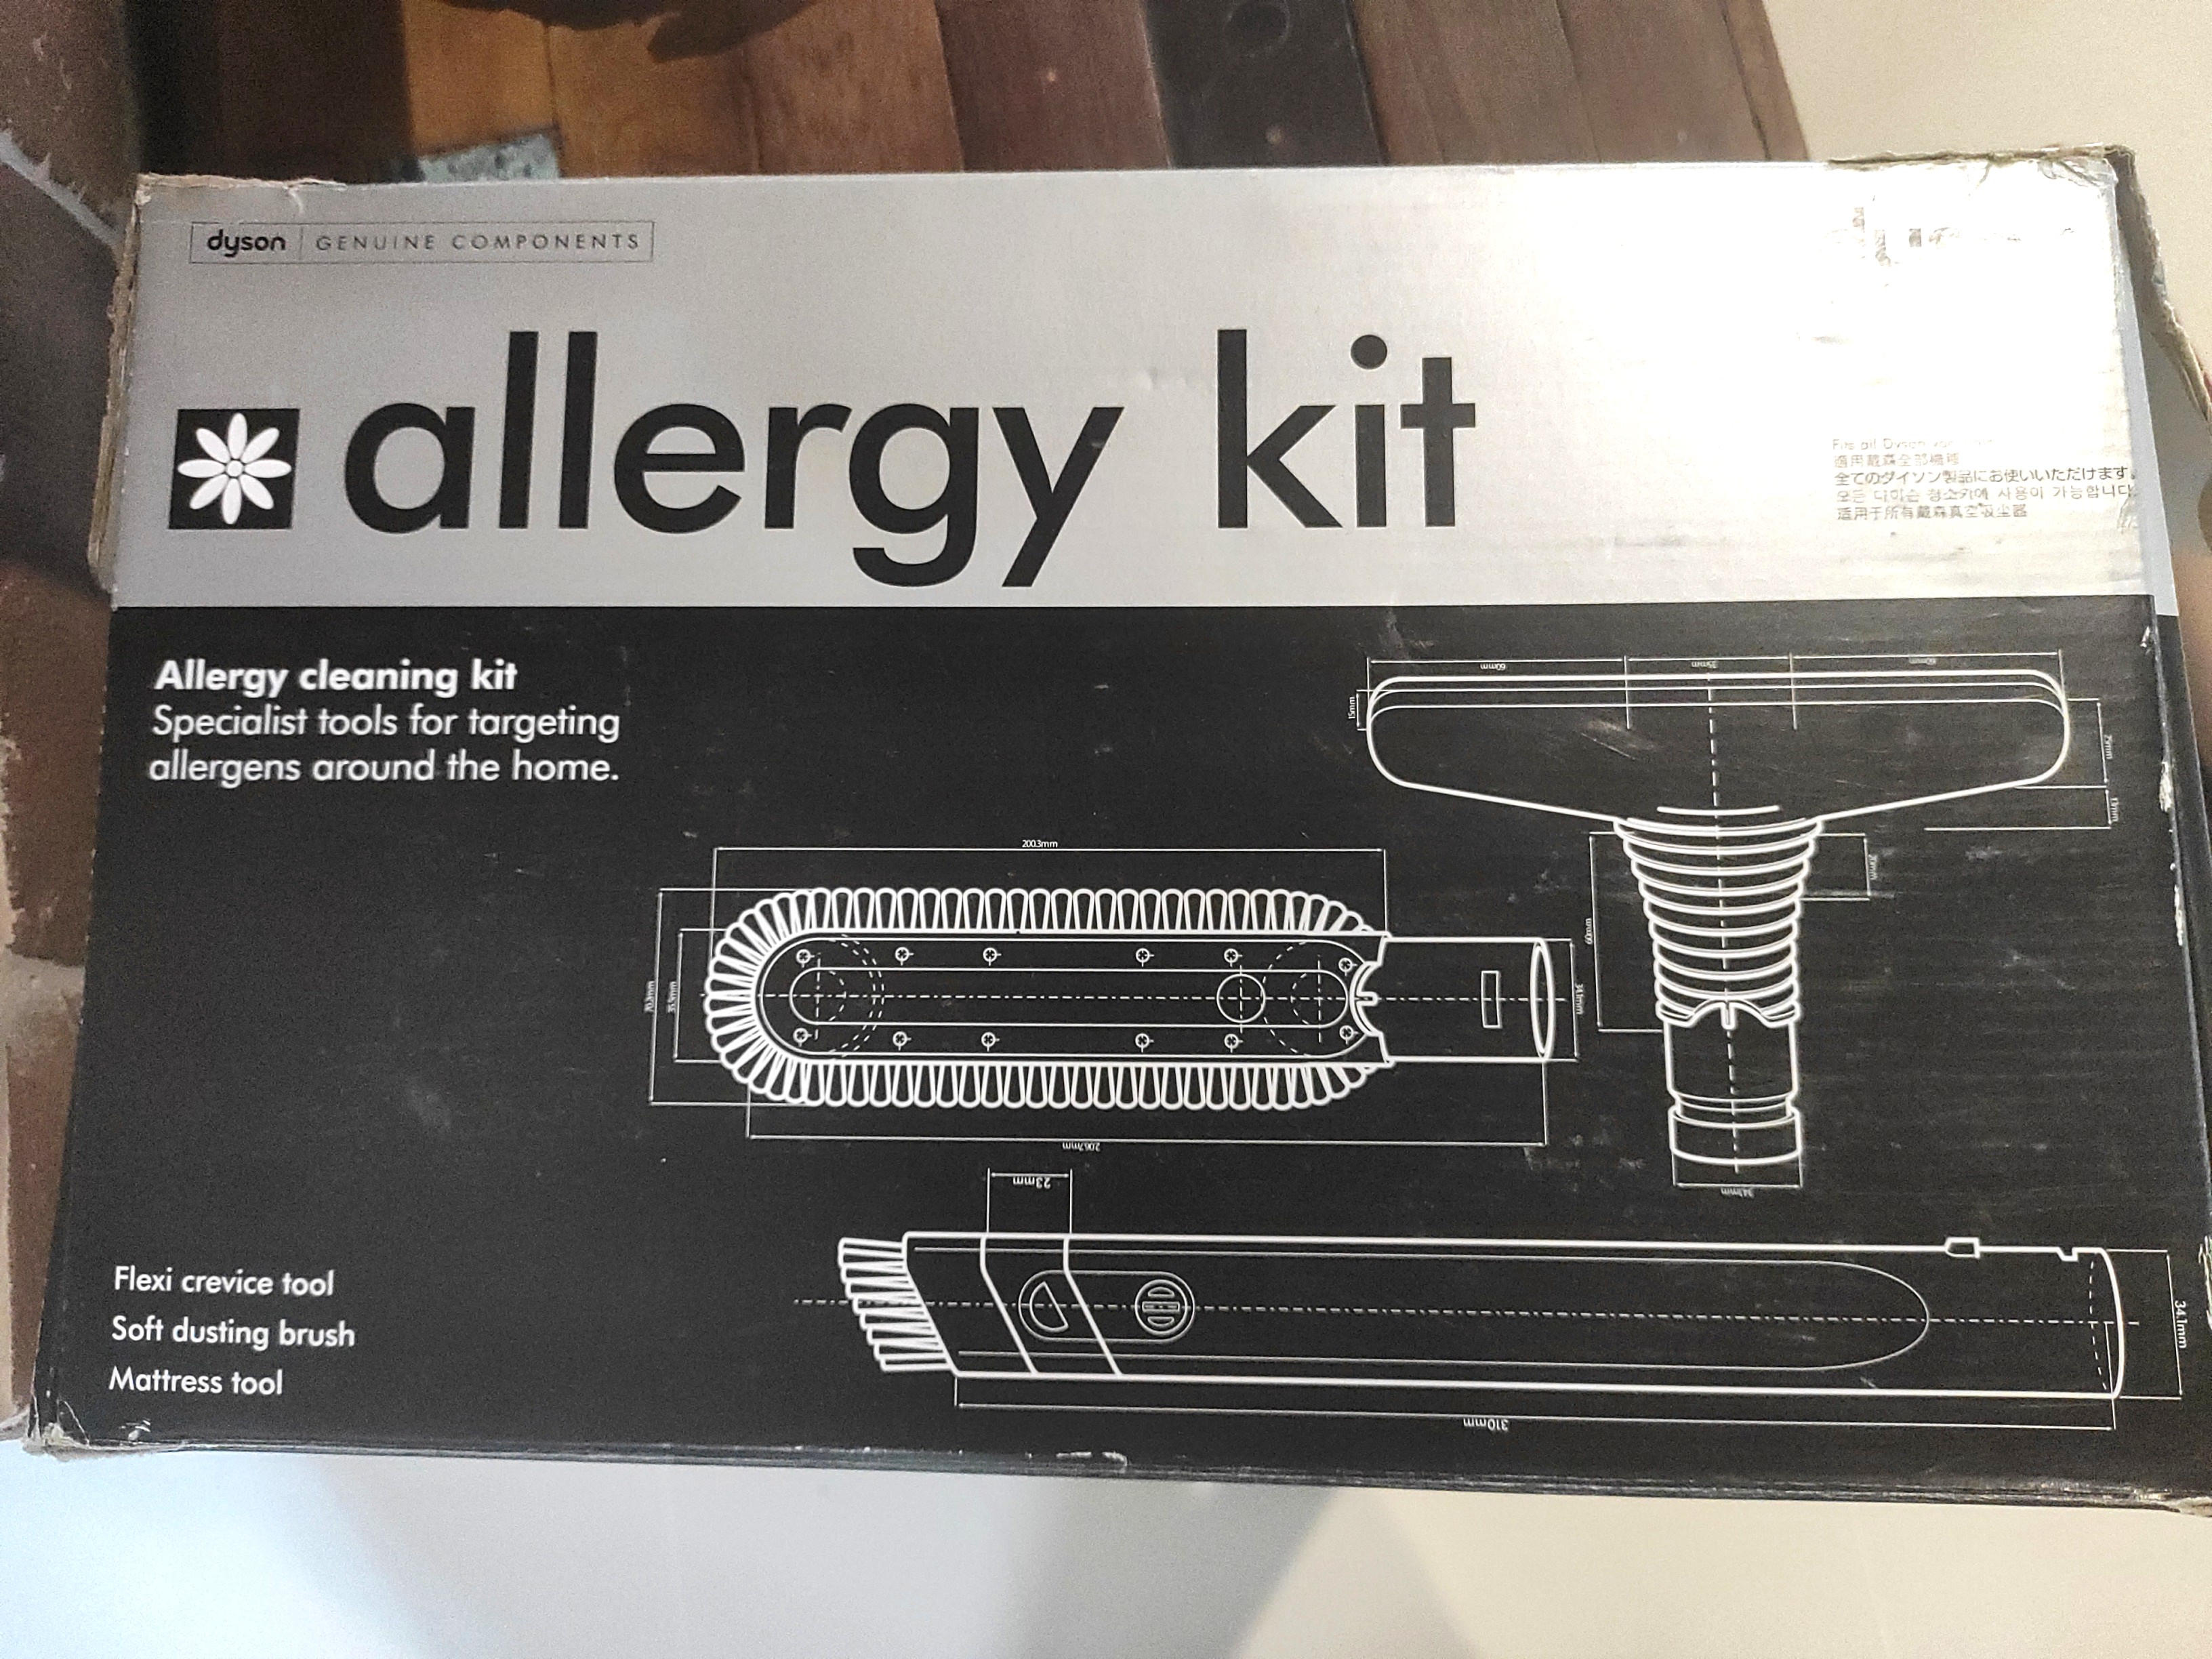 Dyson Allergy Kit, Furniture & Home Living, Cleaning & Homecare